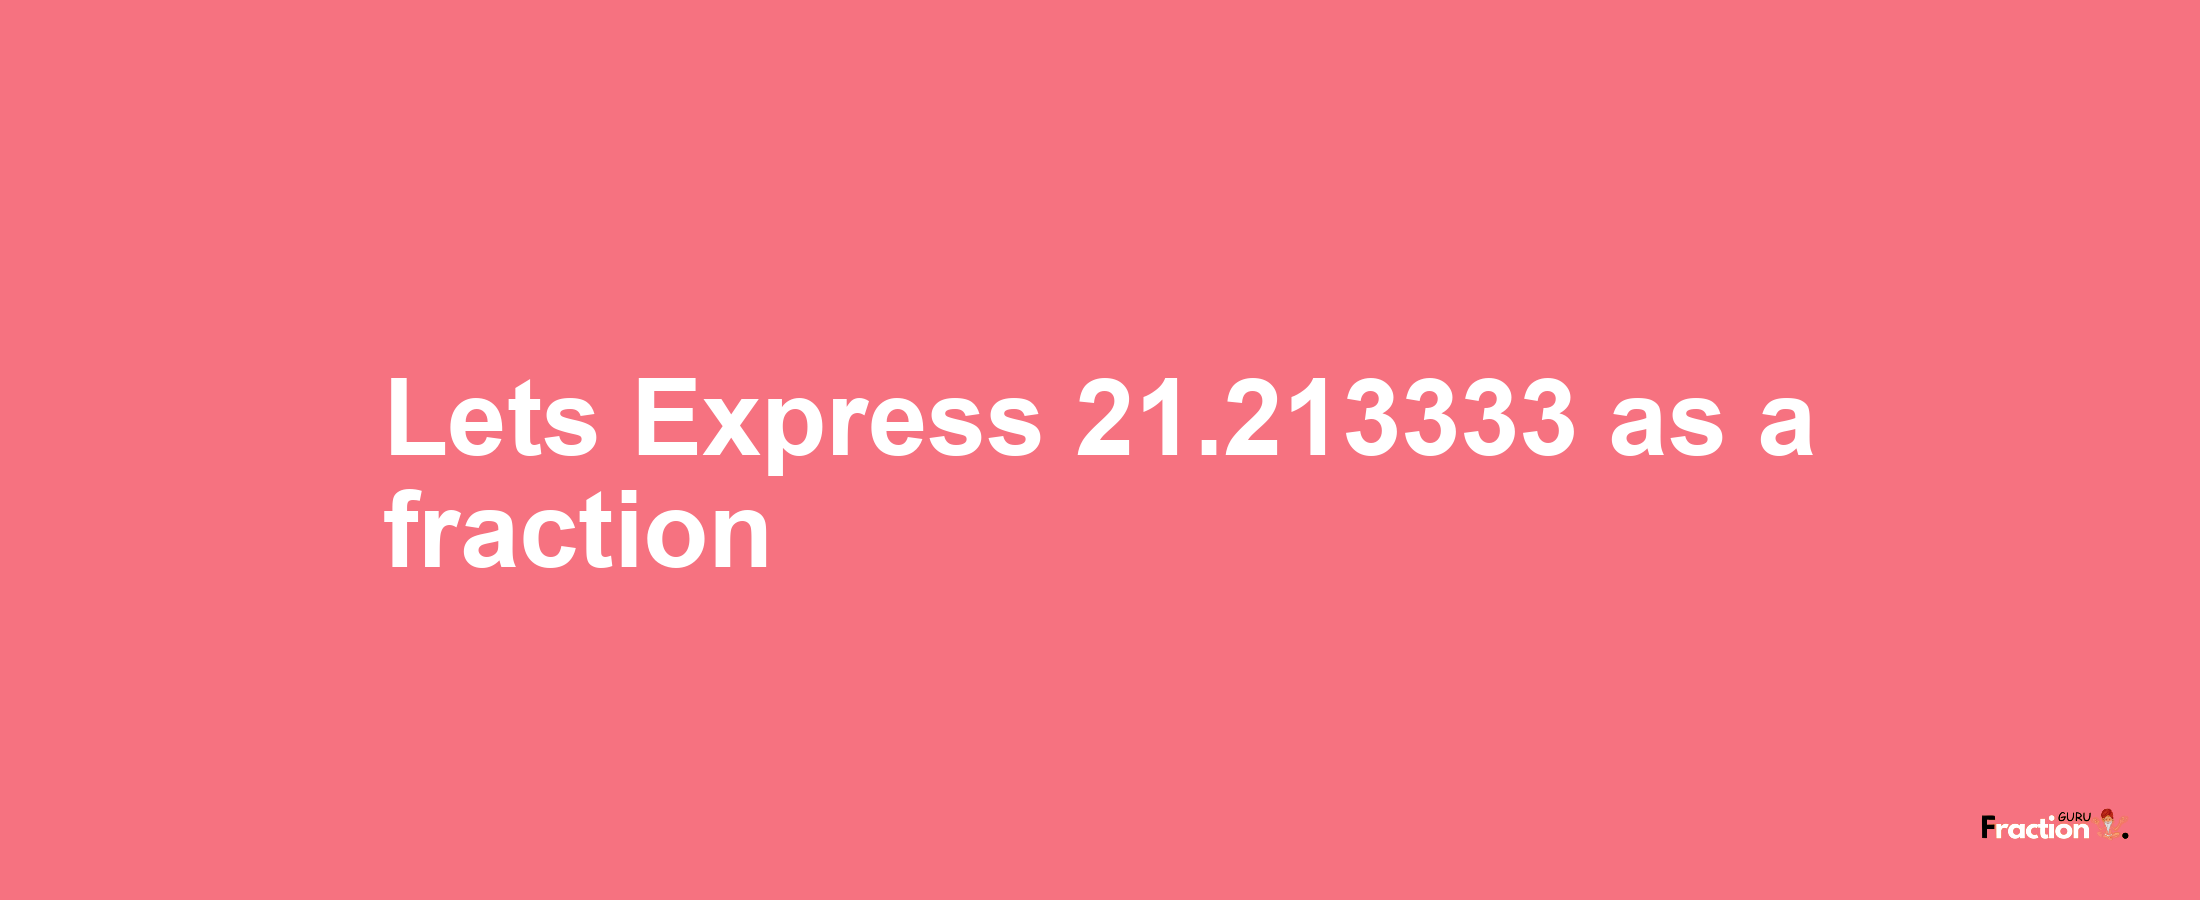 Lets Express 21.213333 as afraction